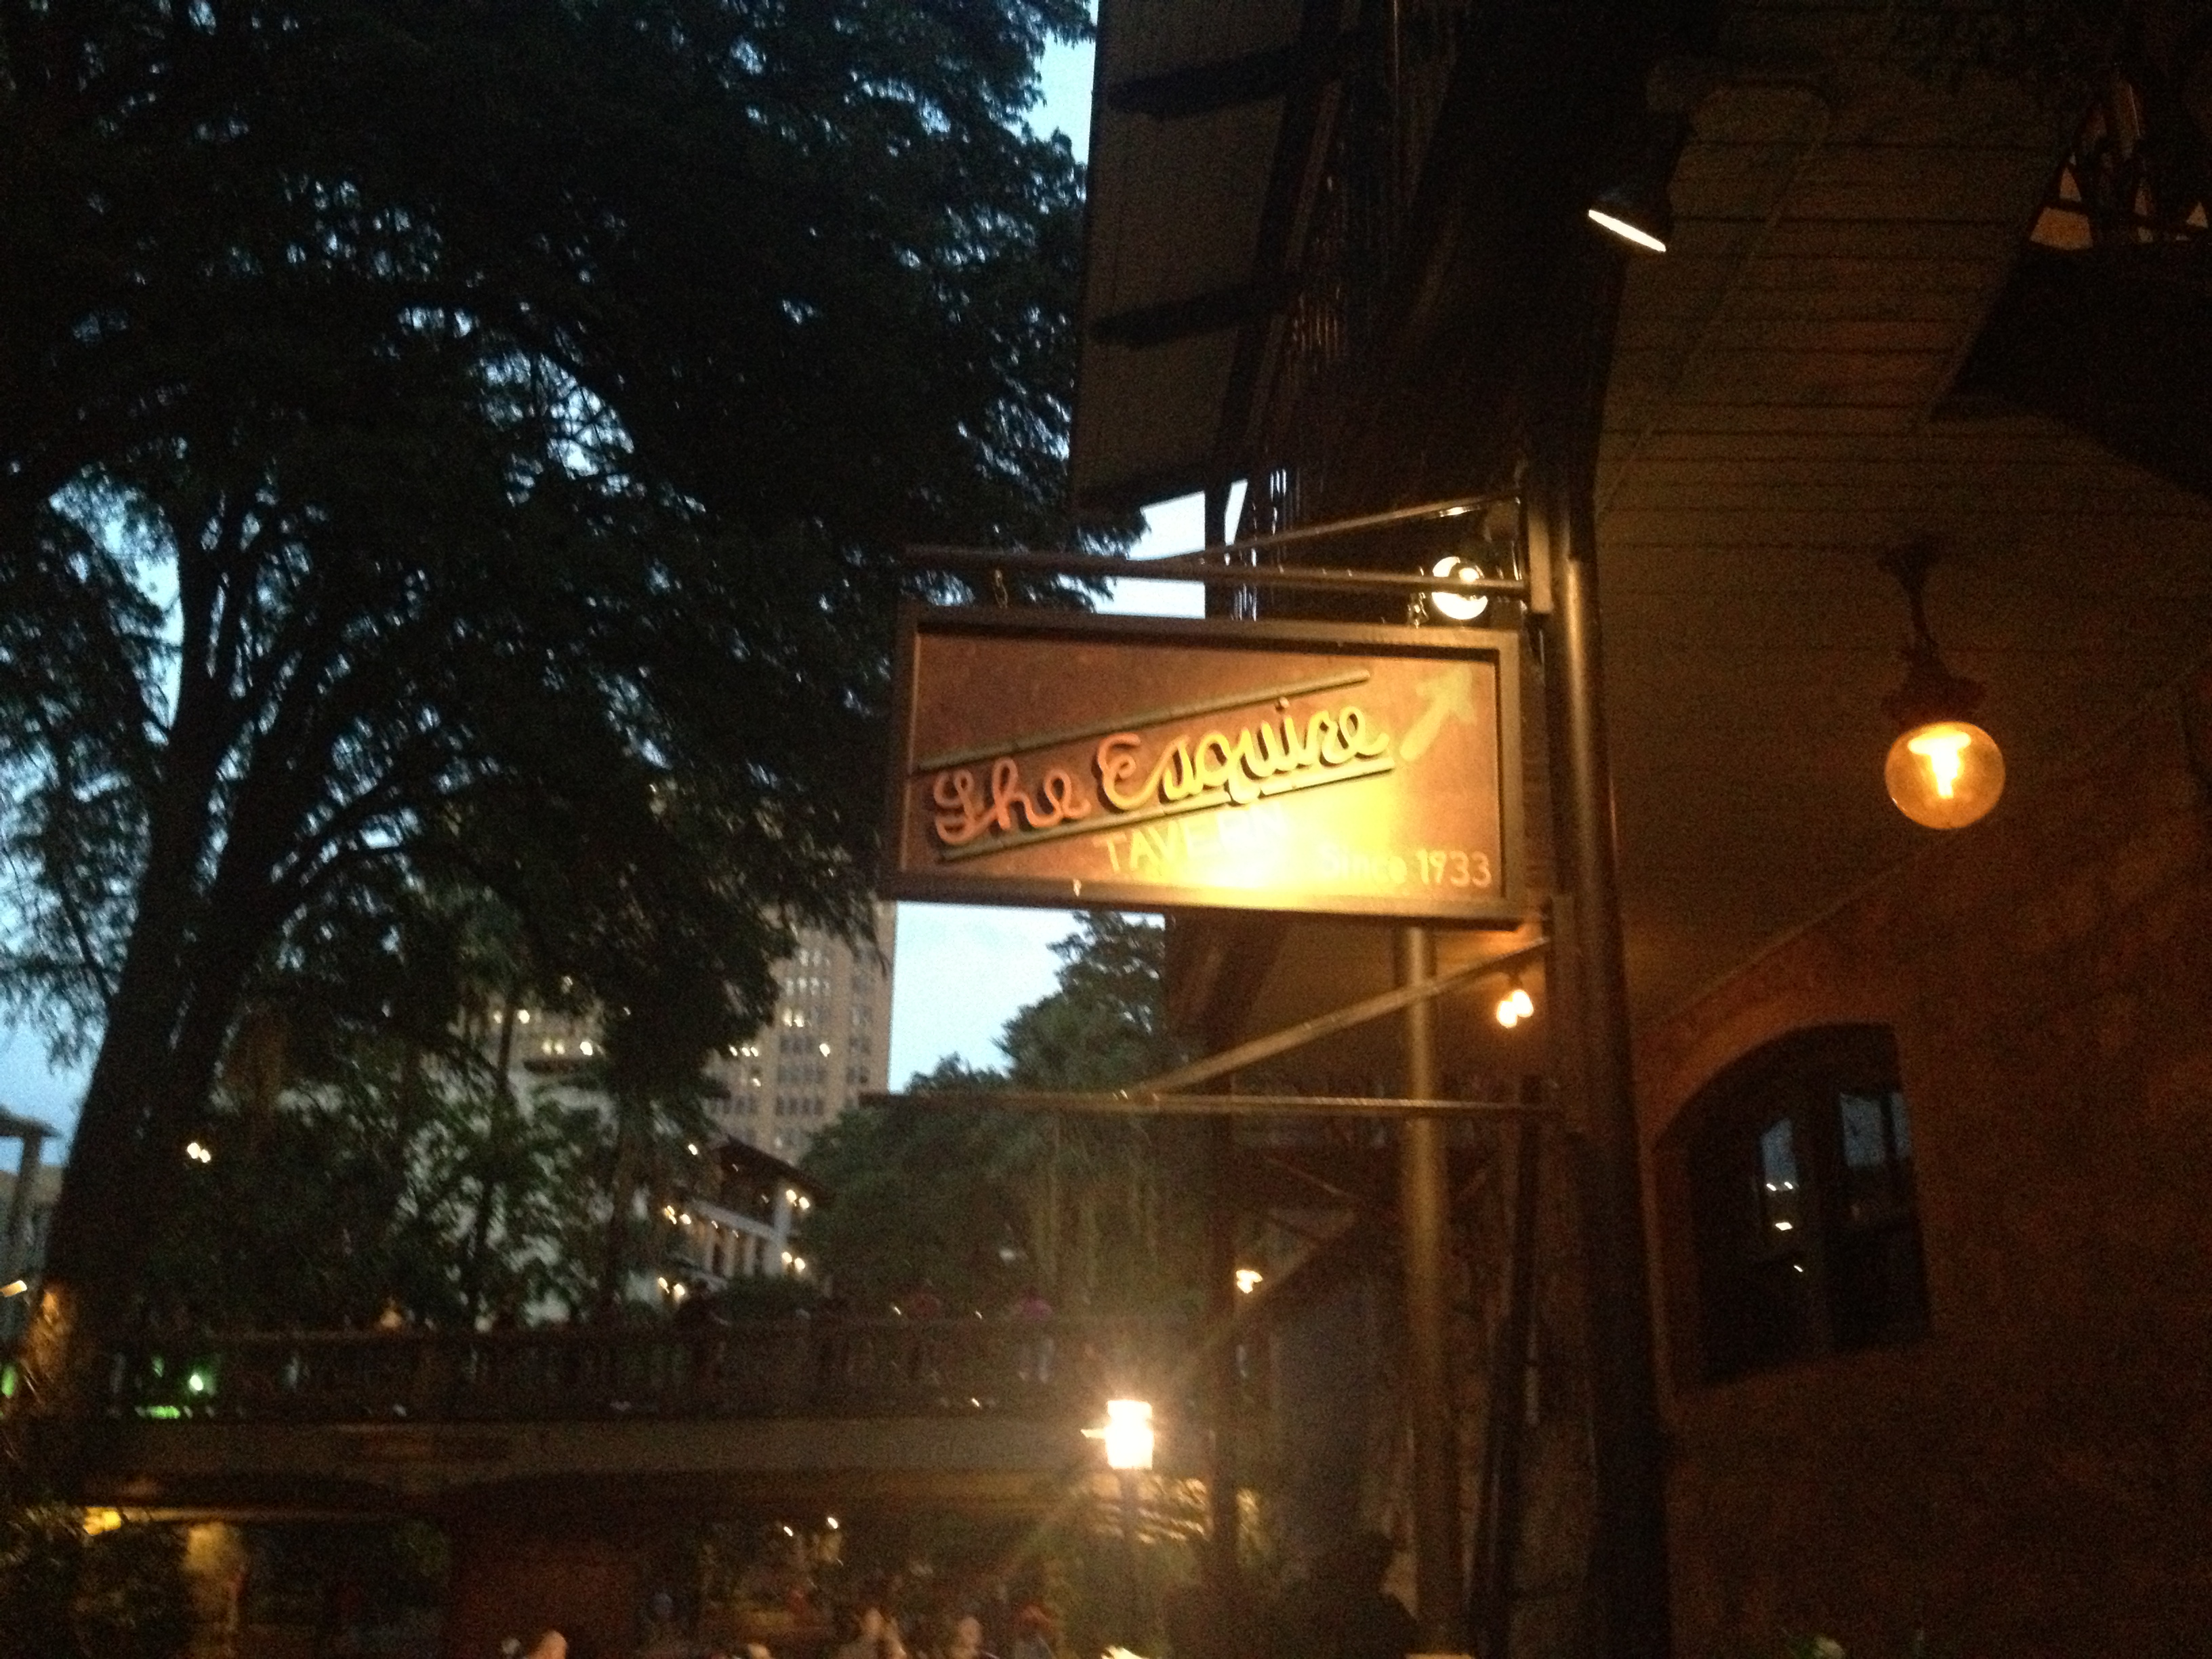 The sign of the Esquire bar in San Antonio.